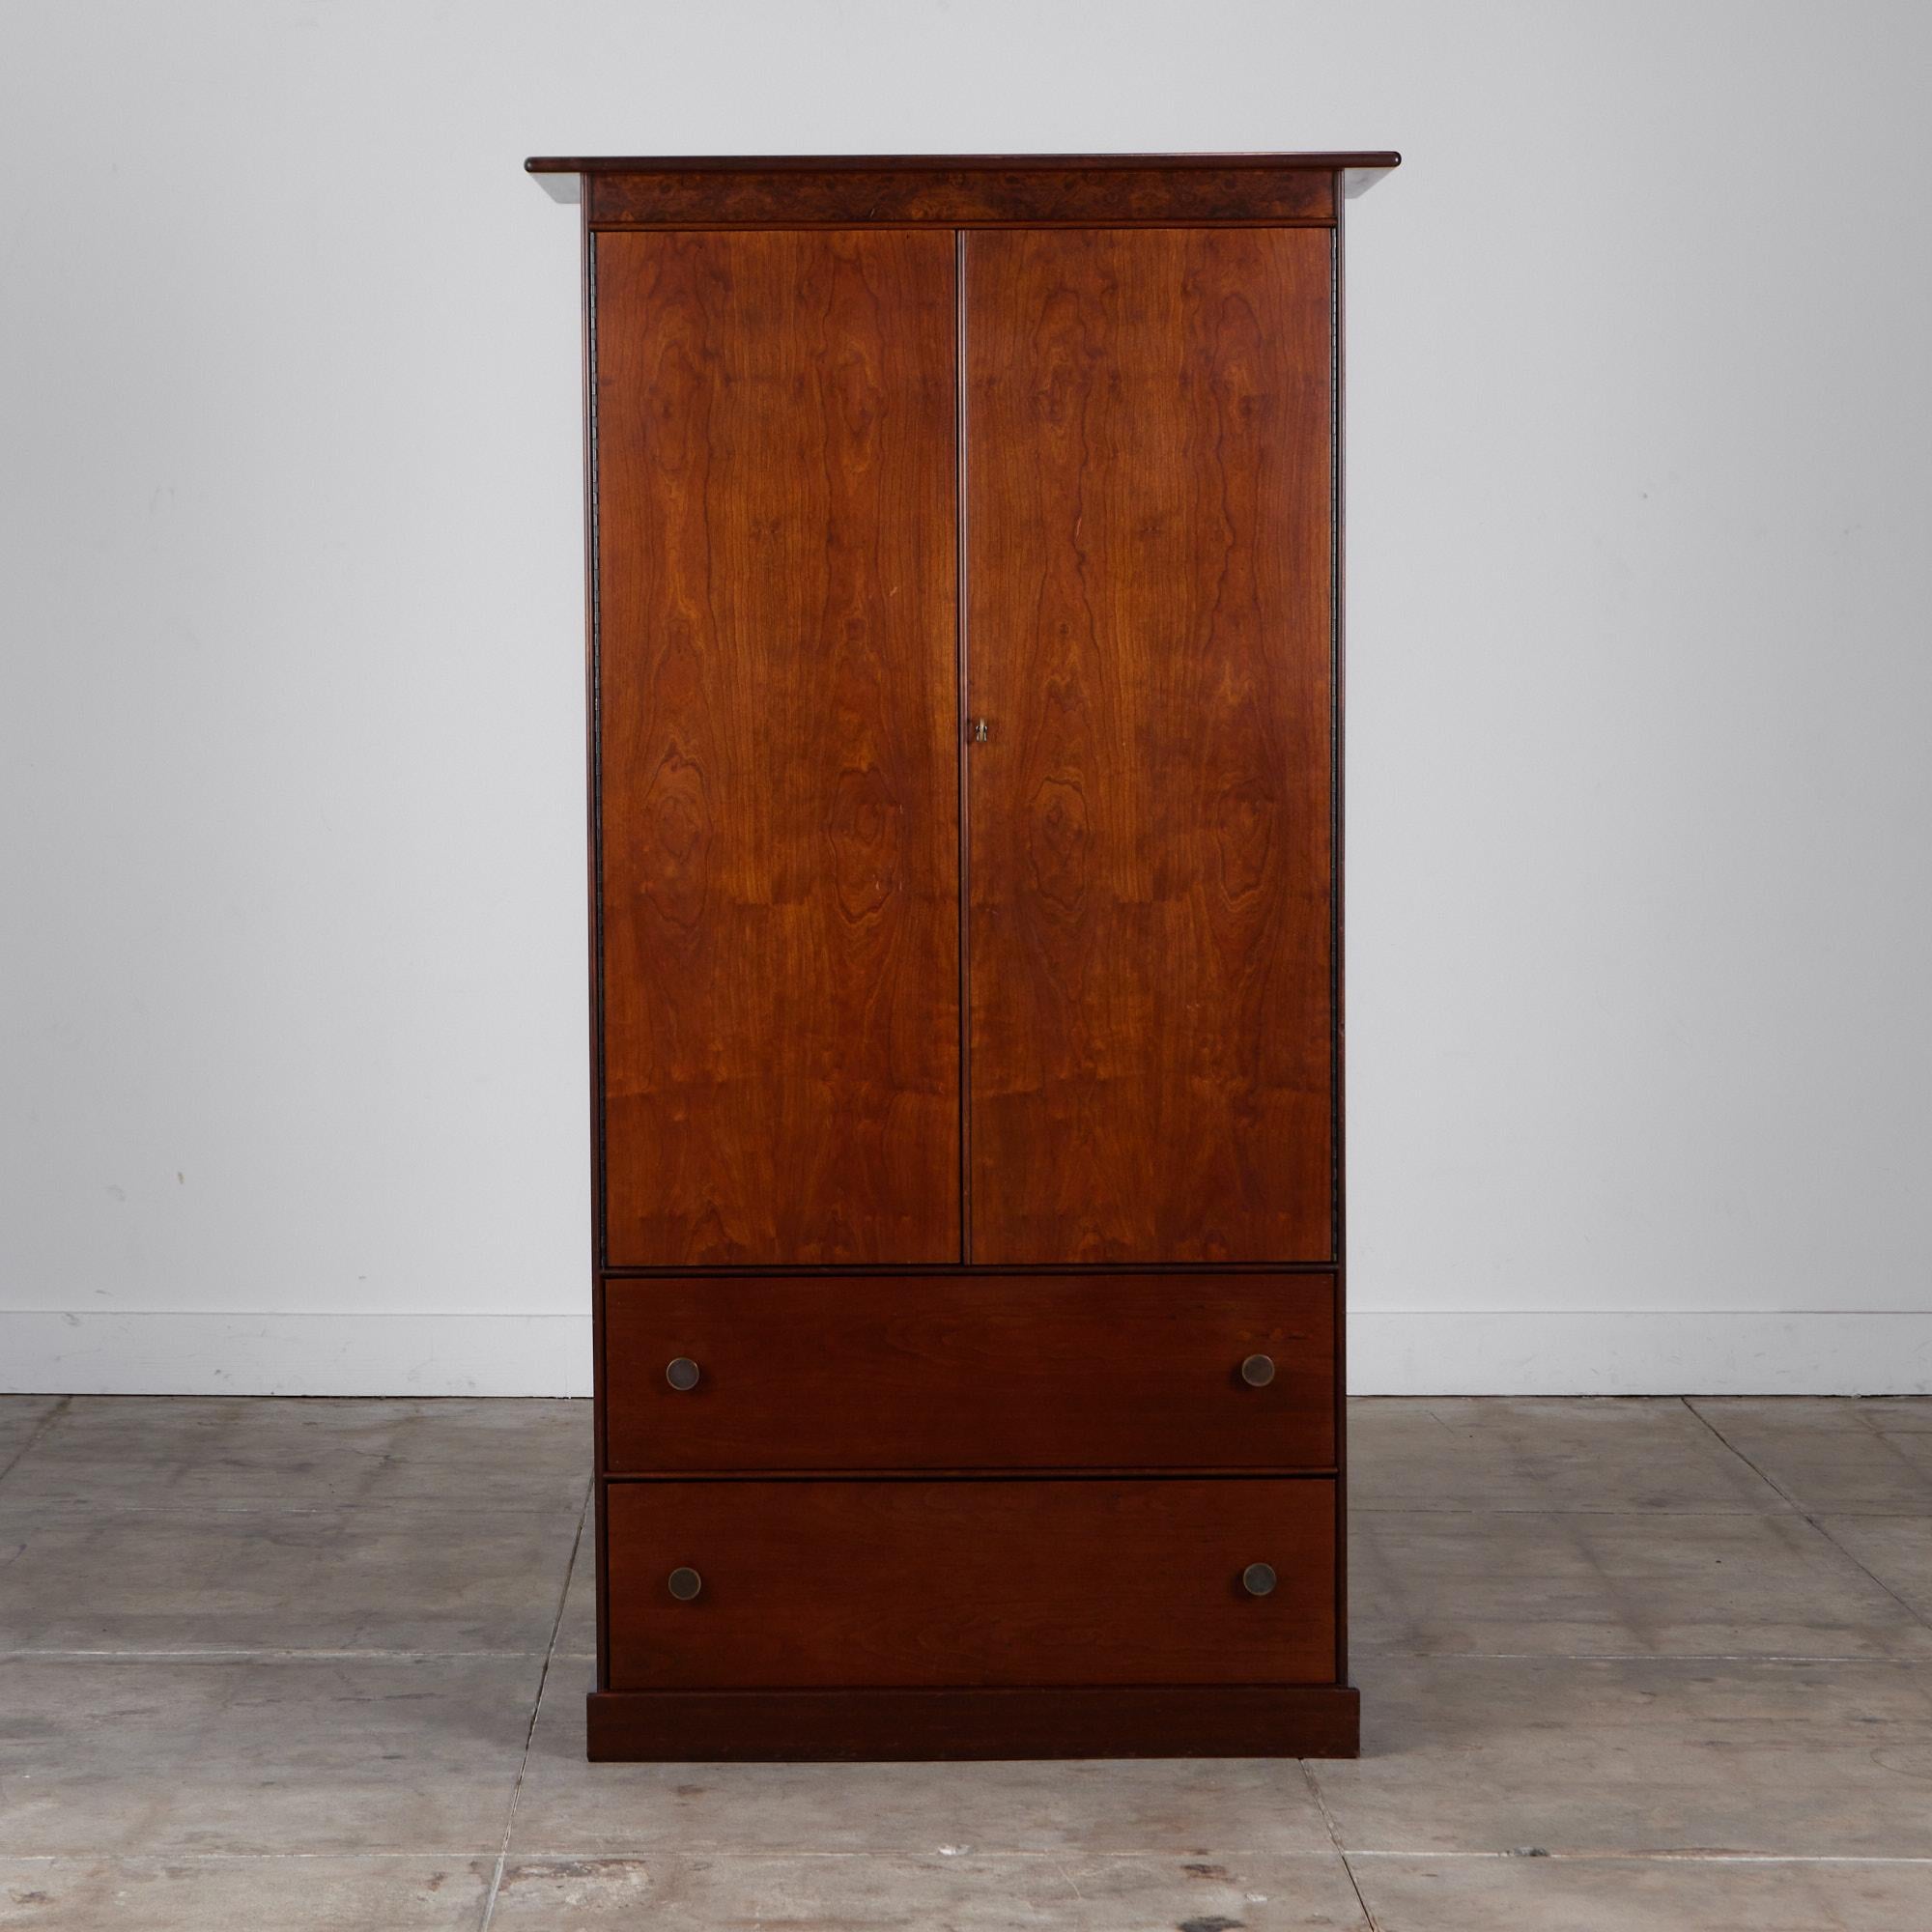 Walnut and burl wood armoire by Milo Baughman for Directional, c.1960s, USA, features eight drawers down the middle of the interior of the cabinet, three upper shelves, two with dividers as well as twenty petite separated compartments. There are two